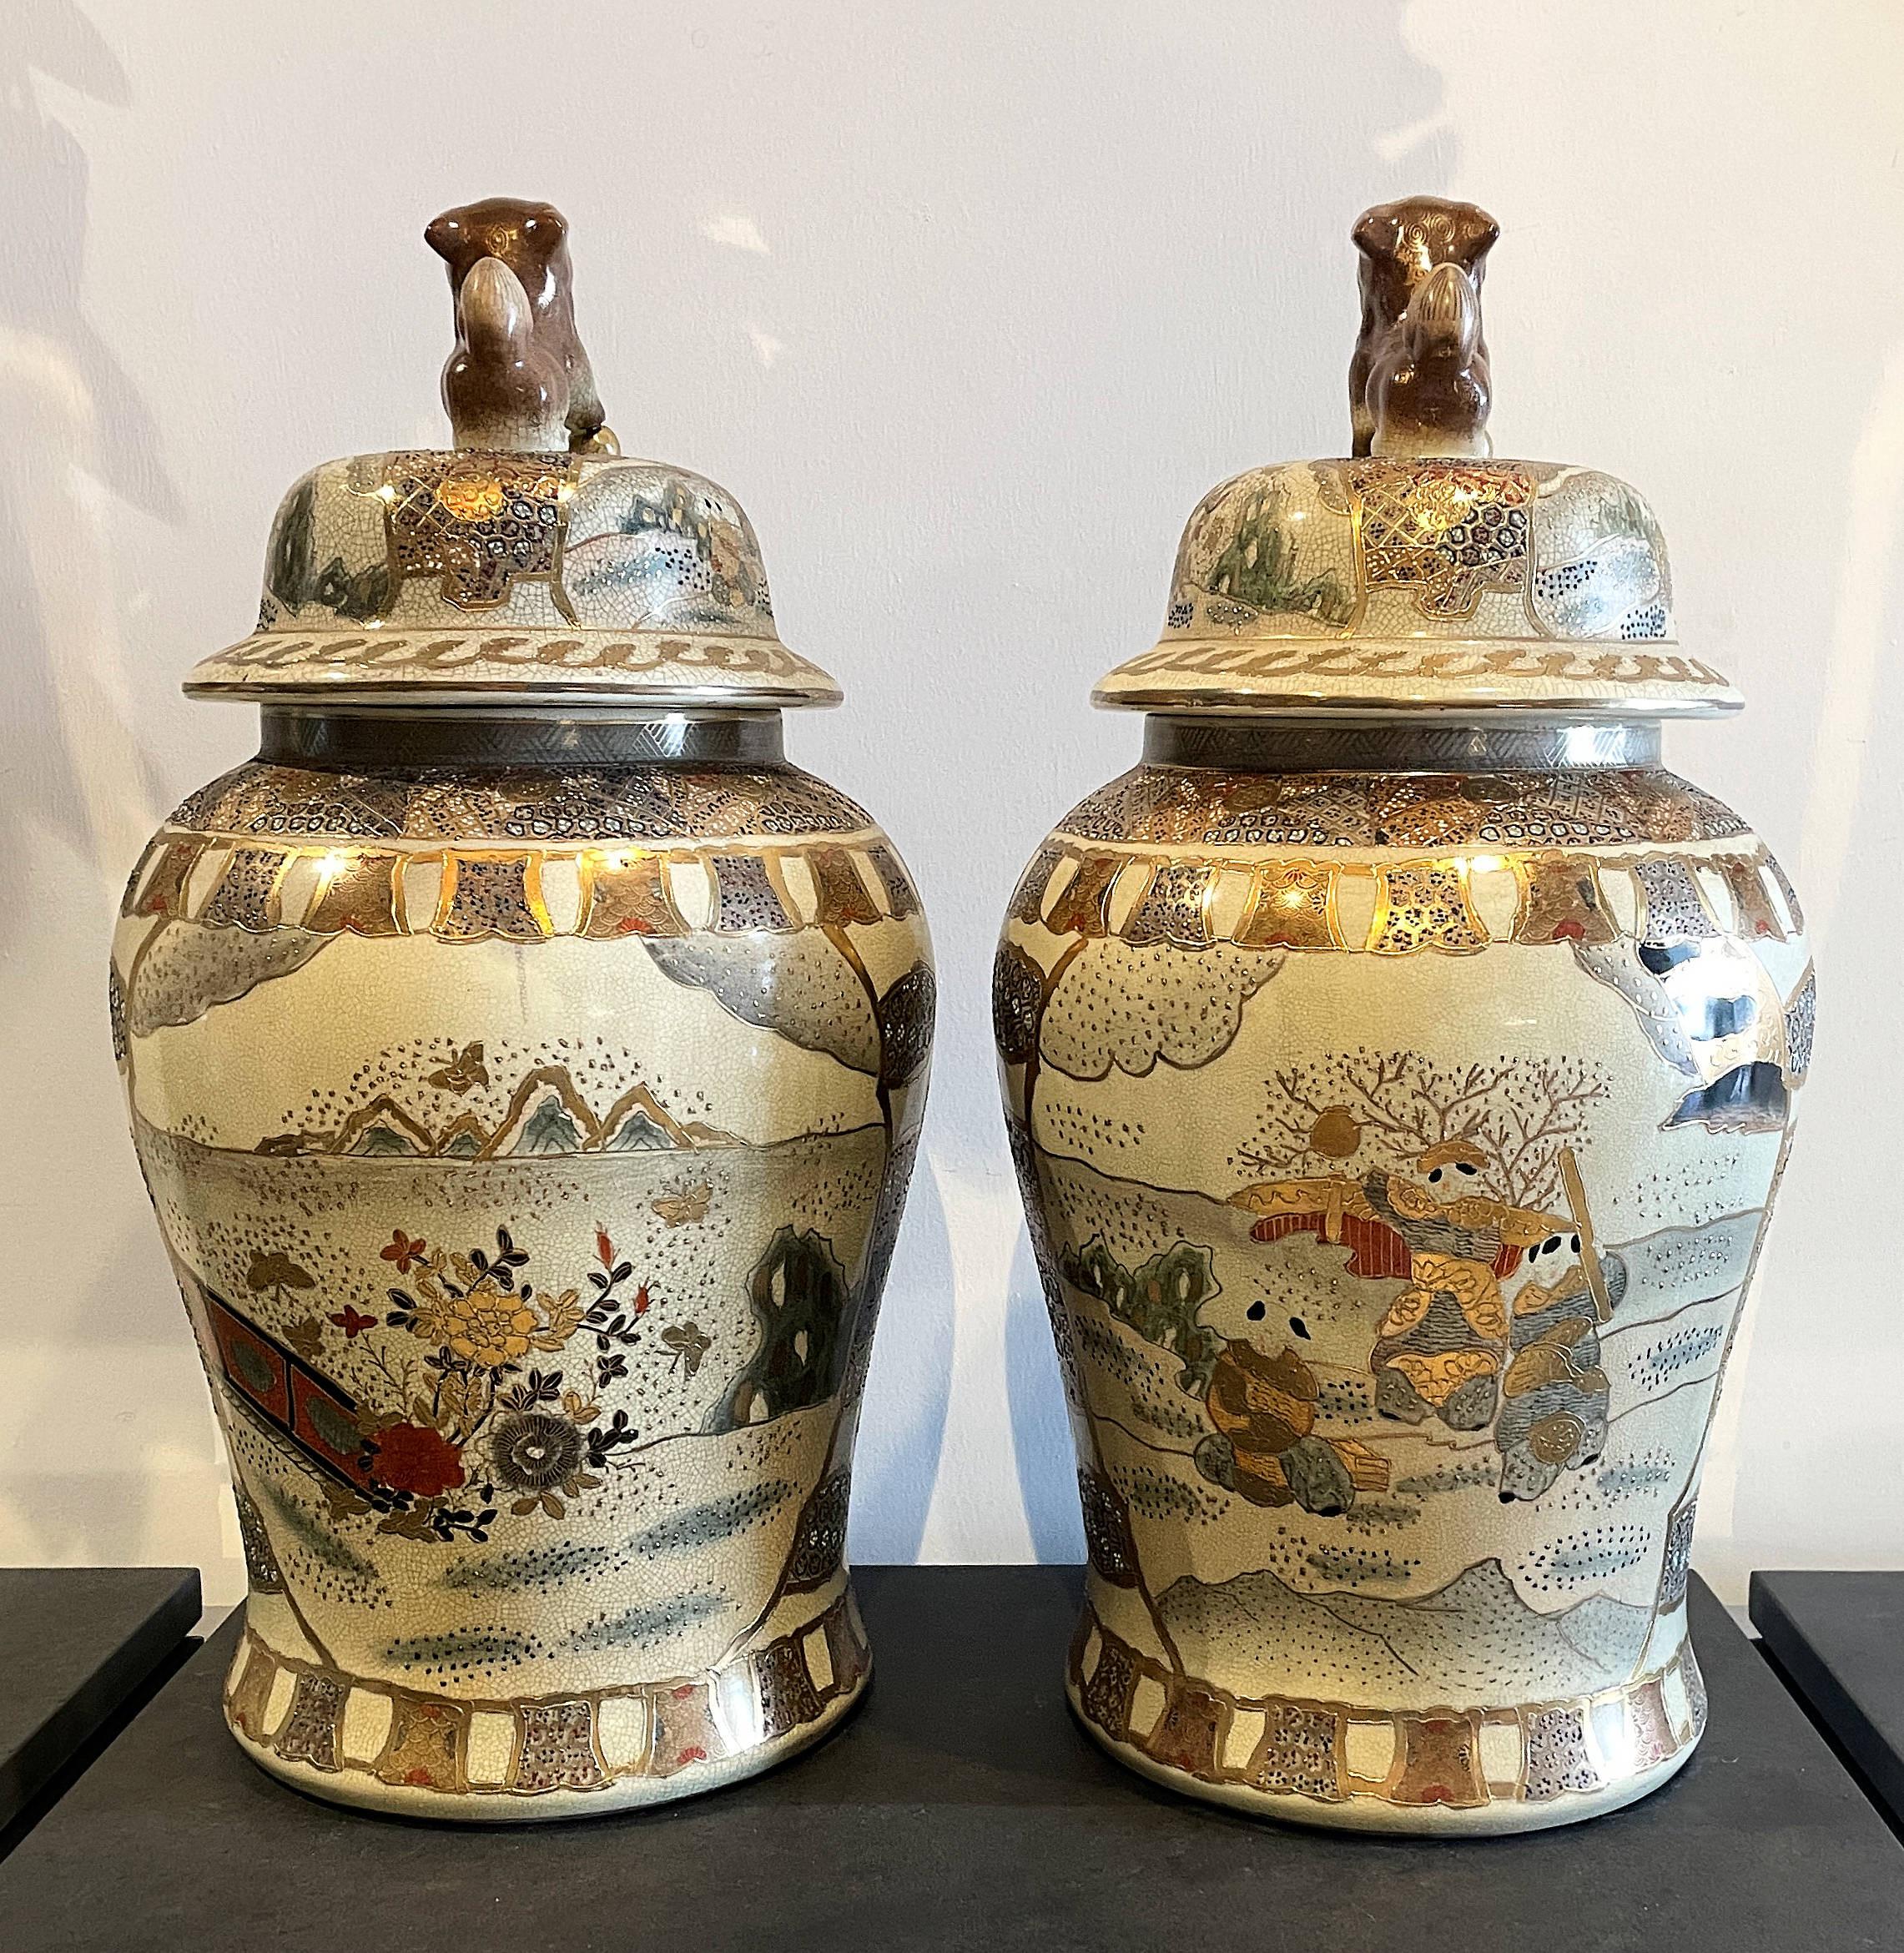 Pair of 19th century temple jars, lidded, Chinoiserie Foo Dog Finials, Exceptional quality and detail with raised hand painted work.